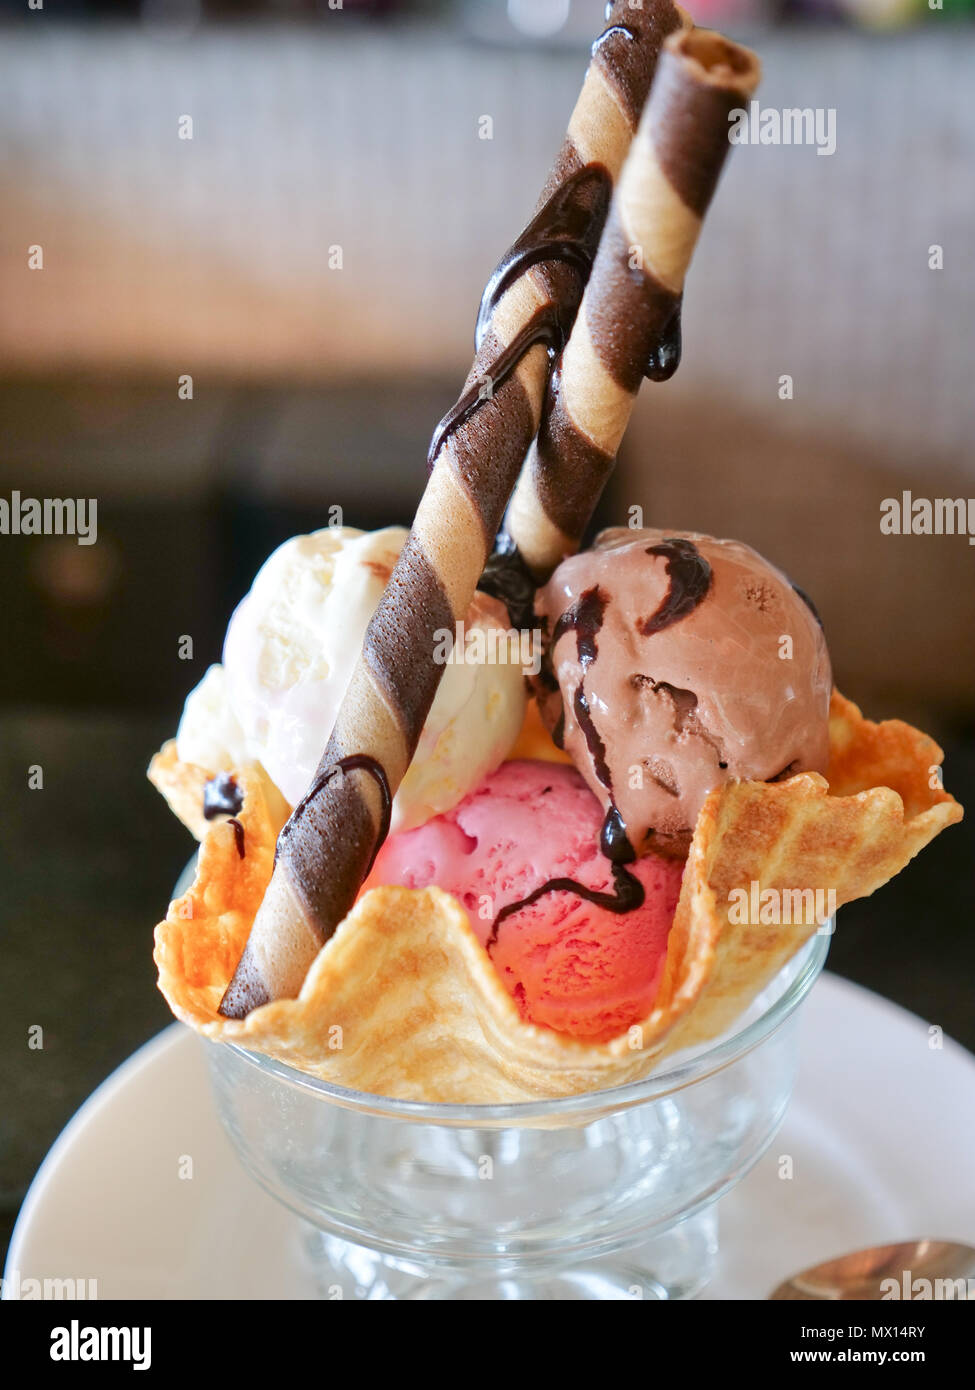 Mixed ice cream scoops in wafer bowl. Dessert Sundae with Neapolitan Flavors of Ice Cream - Glass Dish with Scoops of Chocolate, Vanilla, and Strawberry Ice Cream with Rolled Cookie Biscuits and Garnishes Stock Photo